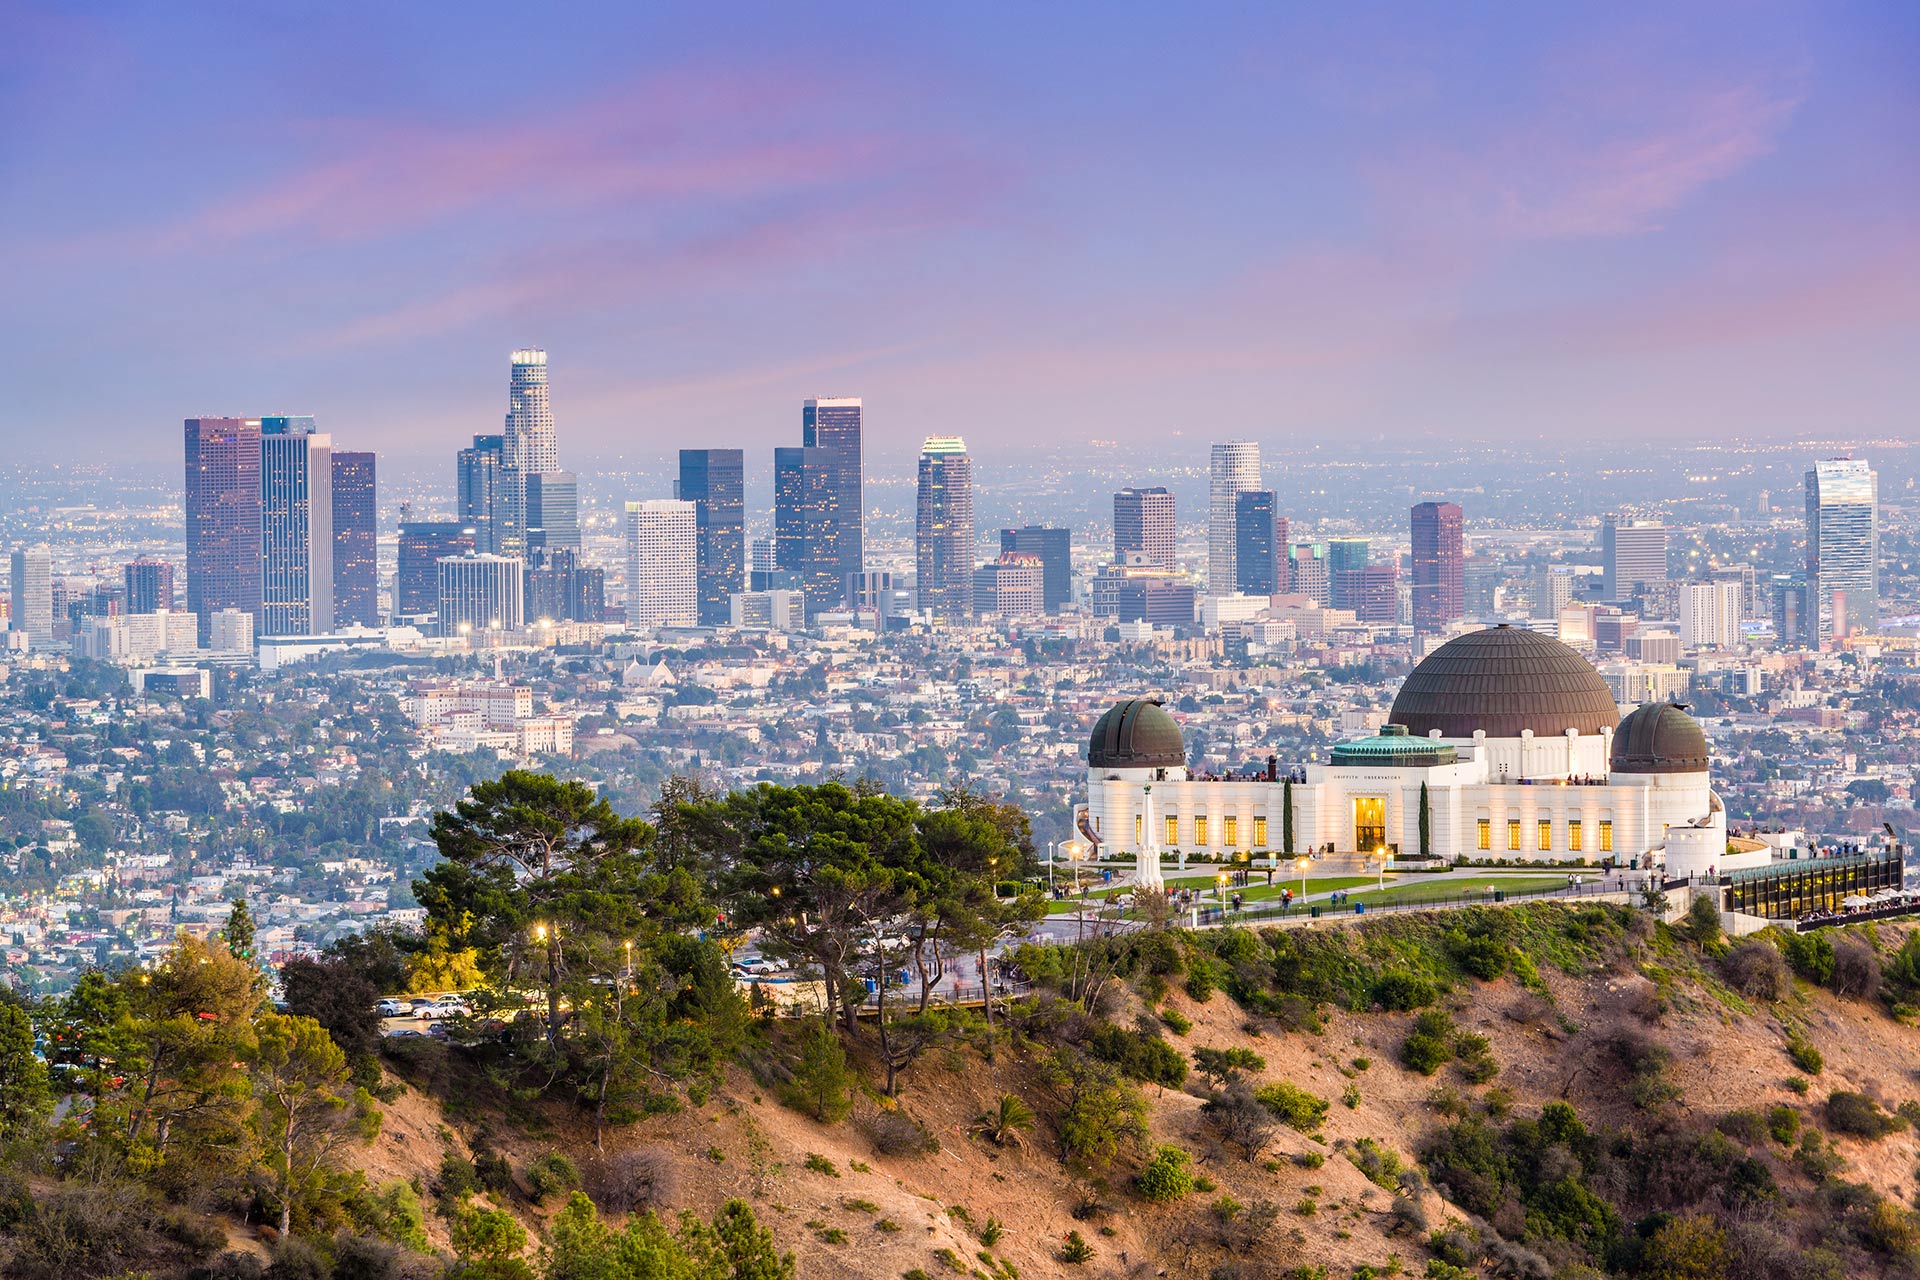 Griffith Observatory in Los Angeles, California.